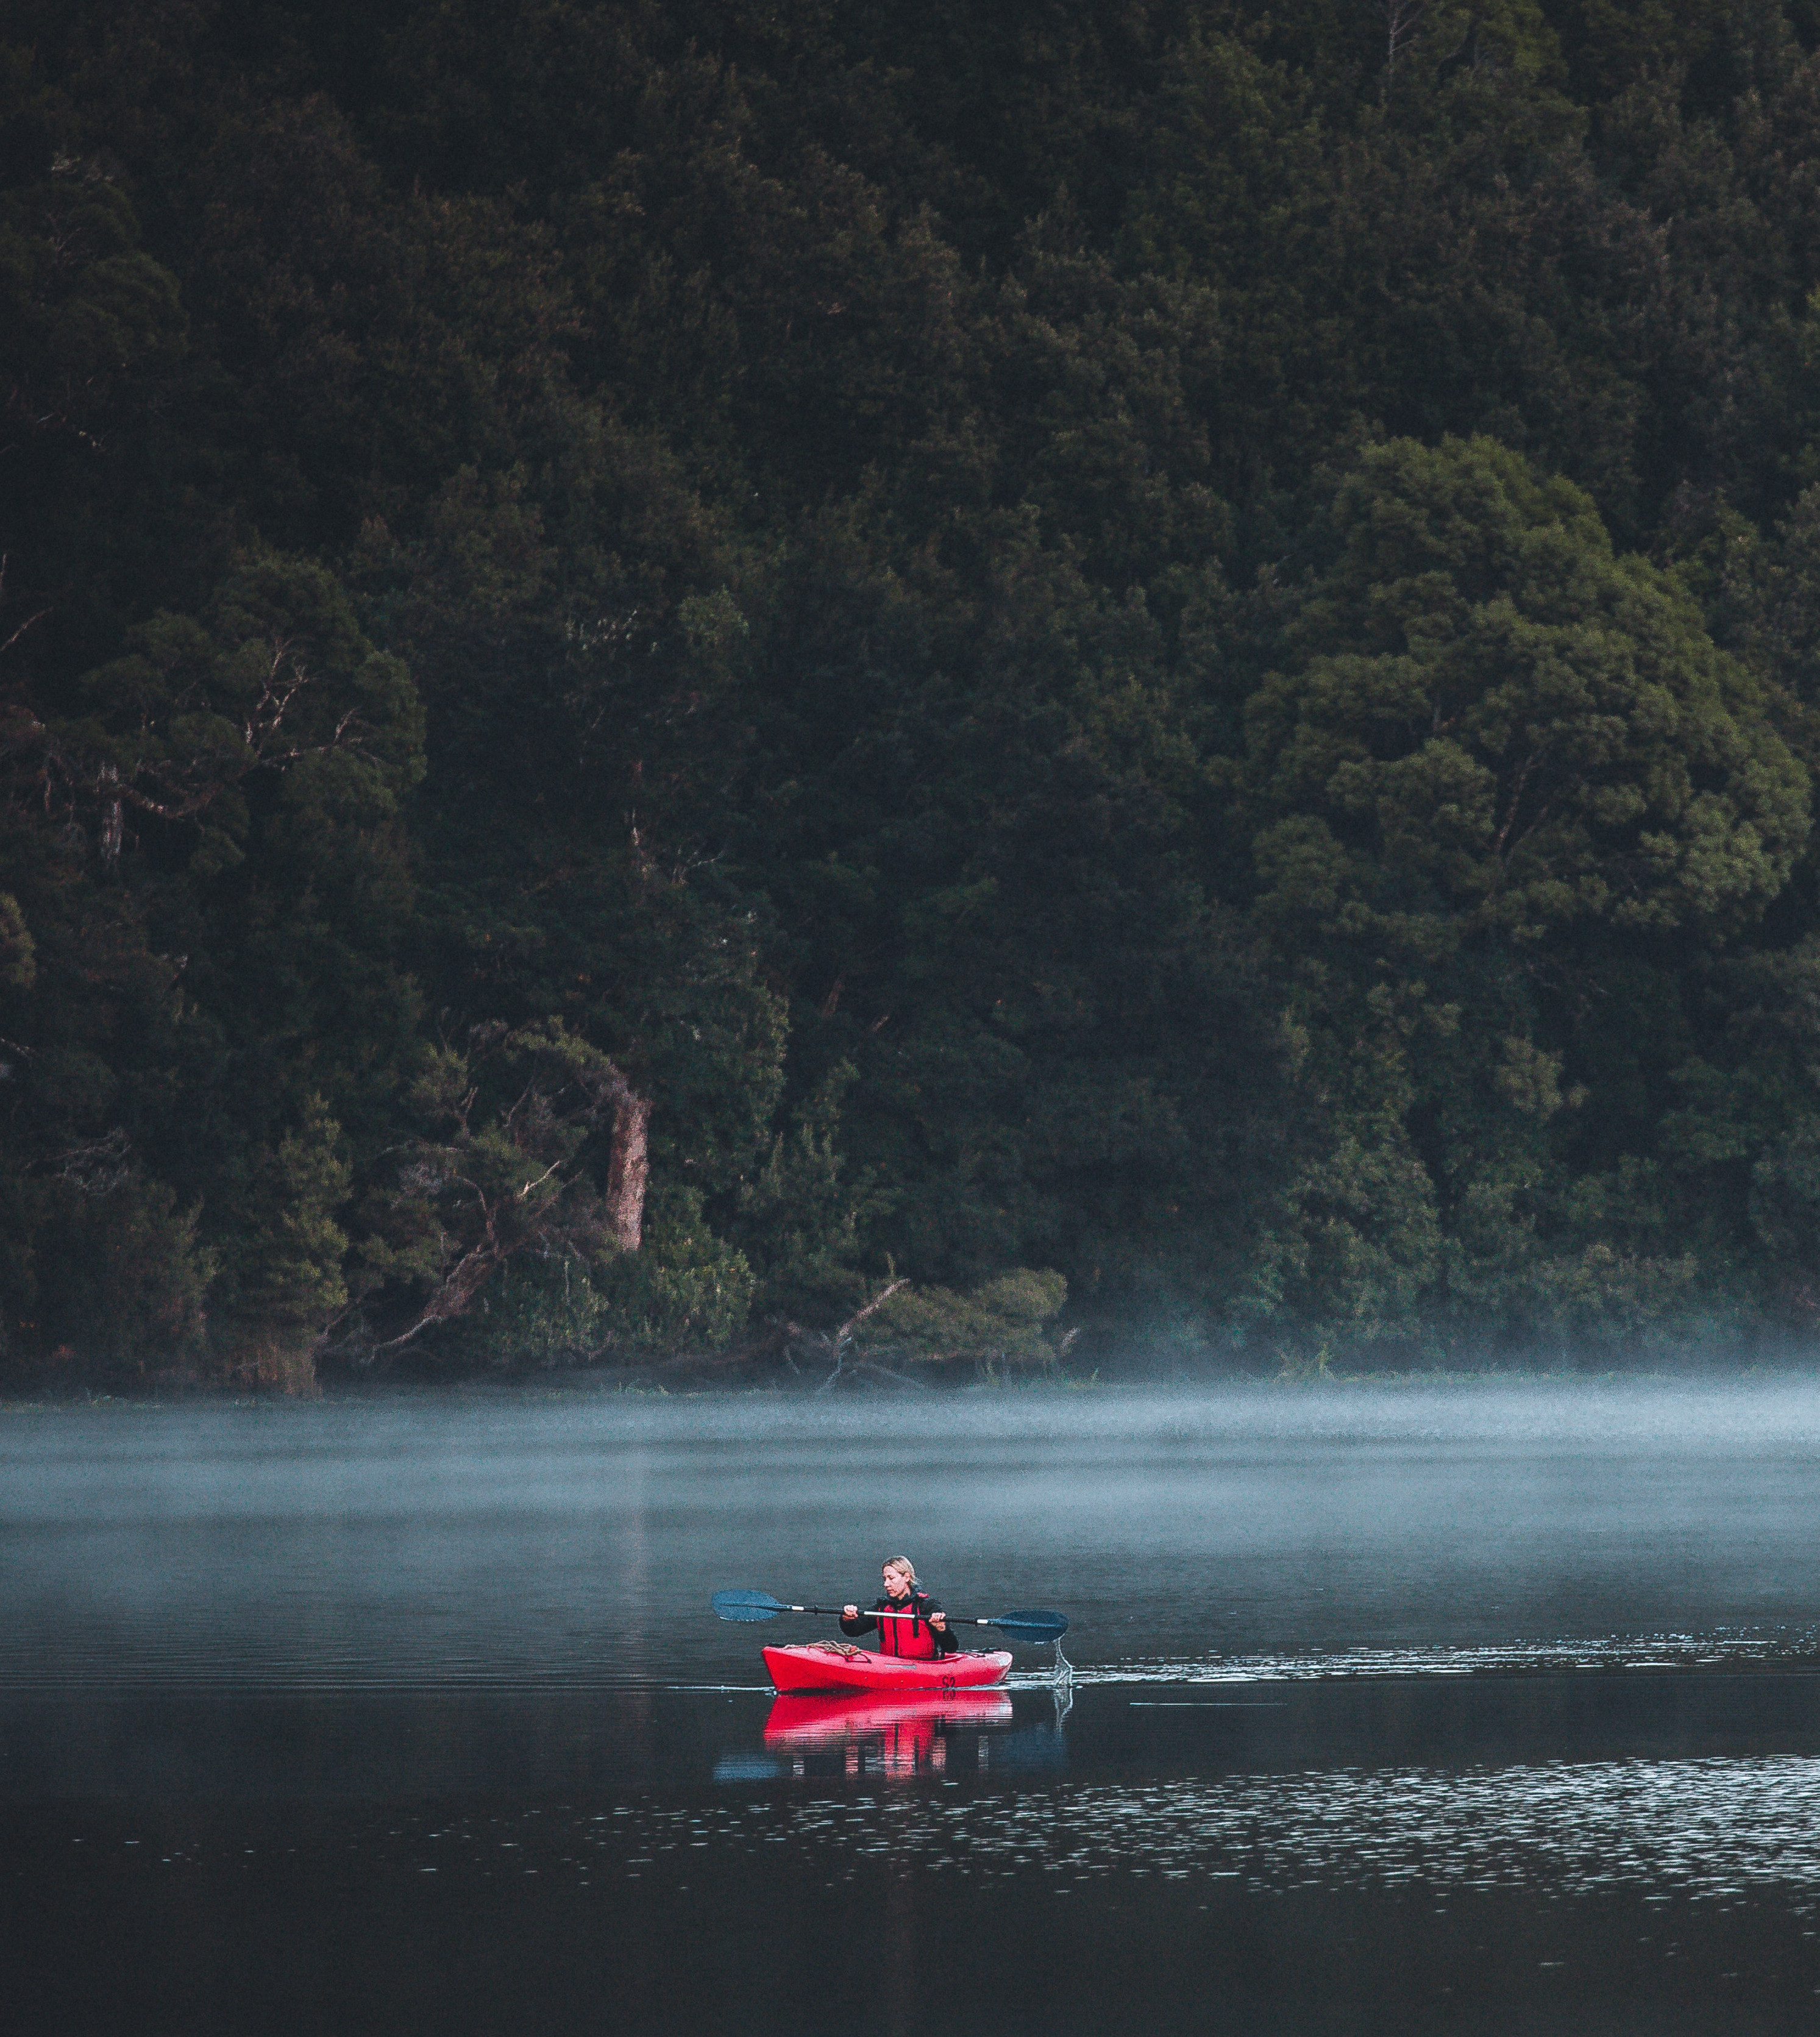 A red kayak floats down the Pieman River in Tasmania.